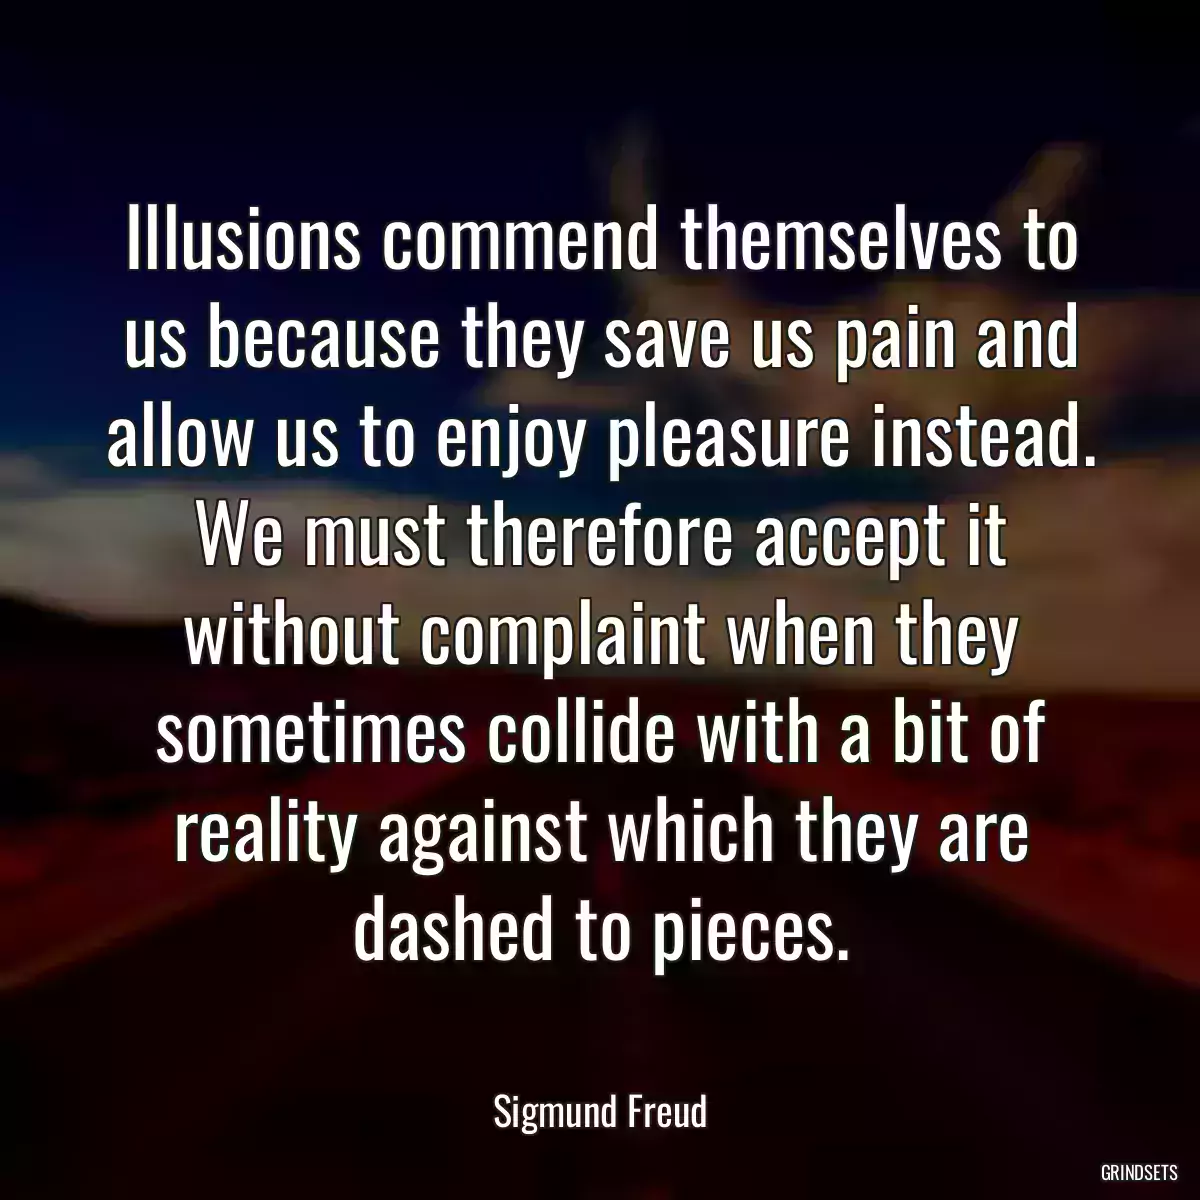 Illusions commend themselves to us because they save us pain and allow us to enjoy pleasure instead. We must therefore accept it without complaint when they sometimes collide with a bit of reality against which they are dashed to pieces.